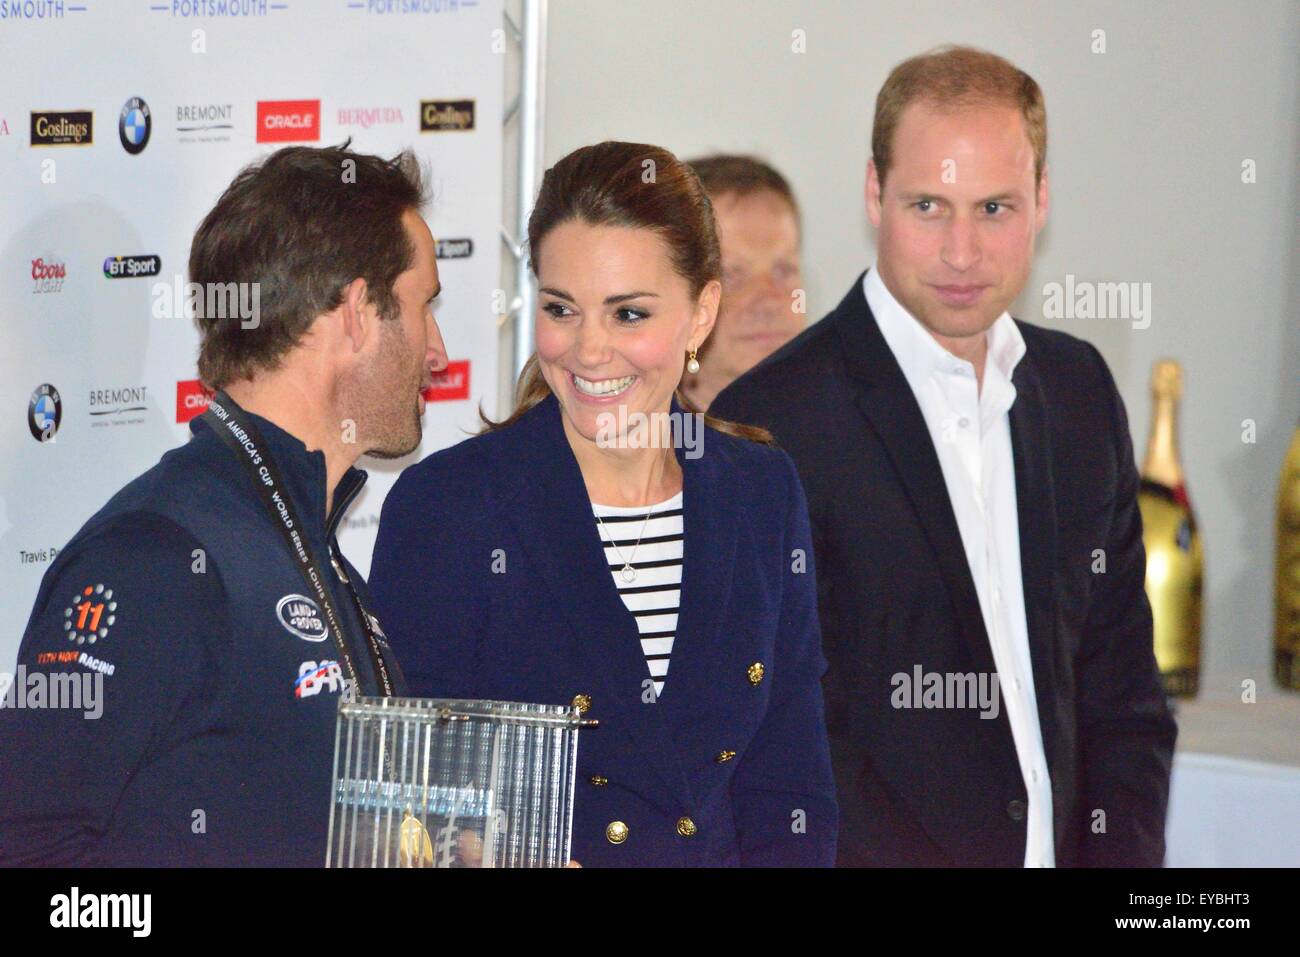 Portsmouth, Hampshire, UK. 26th July, 2015. The Duke and Duchess of Cambridge presenting the Louis Vuitton America's Cup World Series Portsmouth today 26 July 2015The Duke and Duchess of Cambridge present Sir Ben Ainslie, skipper of the British 'Land Rover BAR' team with the cup for winning the Louis Vuitton America's Cup World Series Portsmouth at the official prize giving.  The cup was designed by 5 year old Leo Howard from a local school on behalf of the 1851 Trust and made by artist Michelle Littlewood Credit:  Wendy Johnson/Alamy Live News  (photographer media accredited for this event) Stock Photo